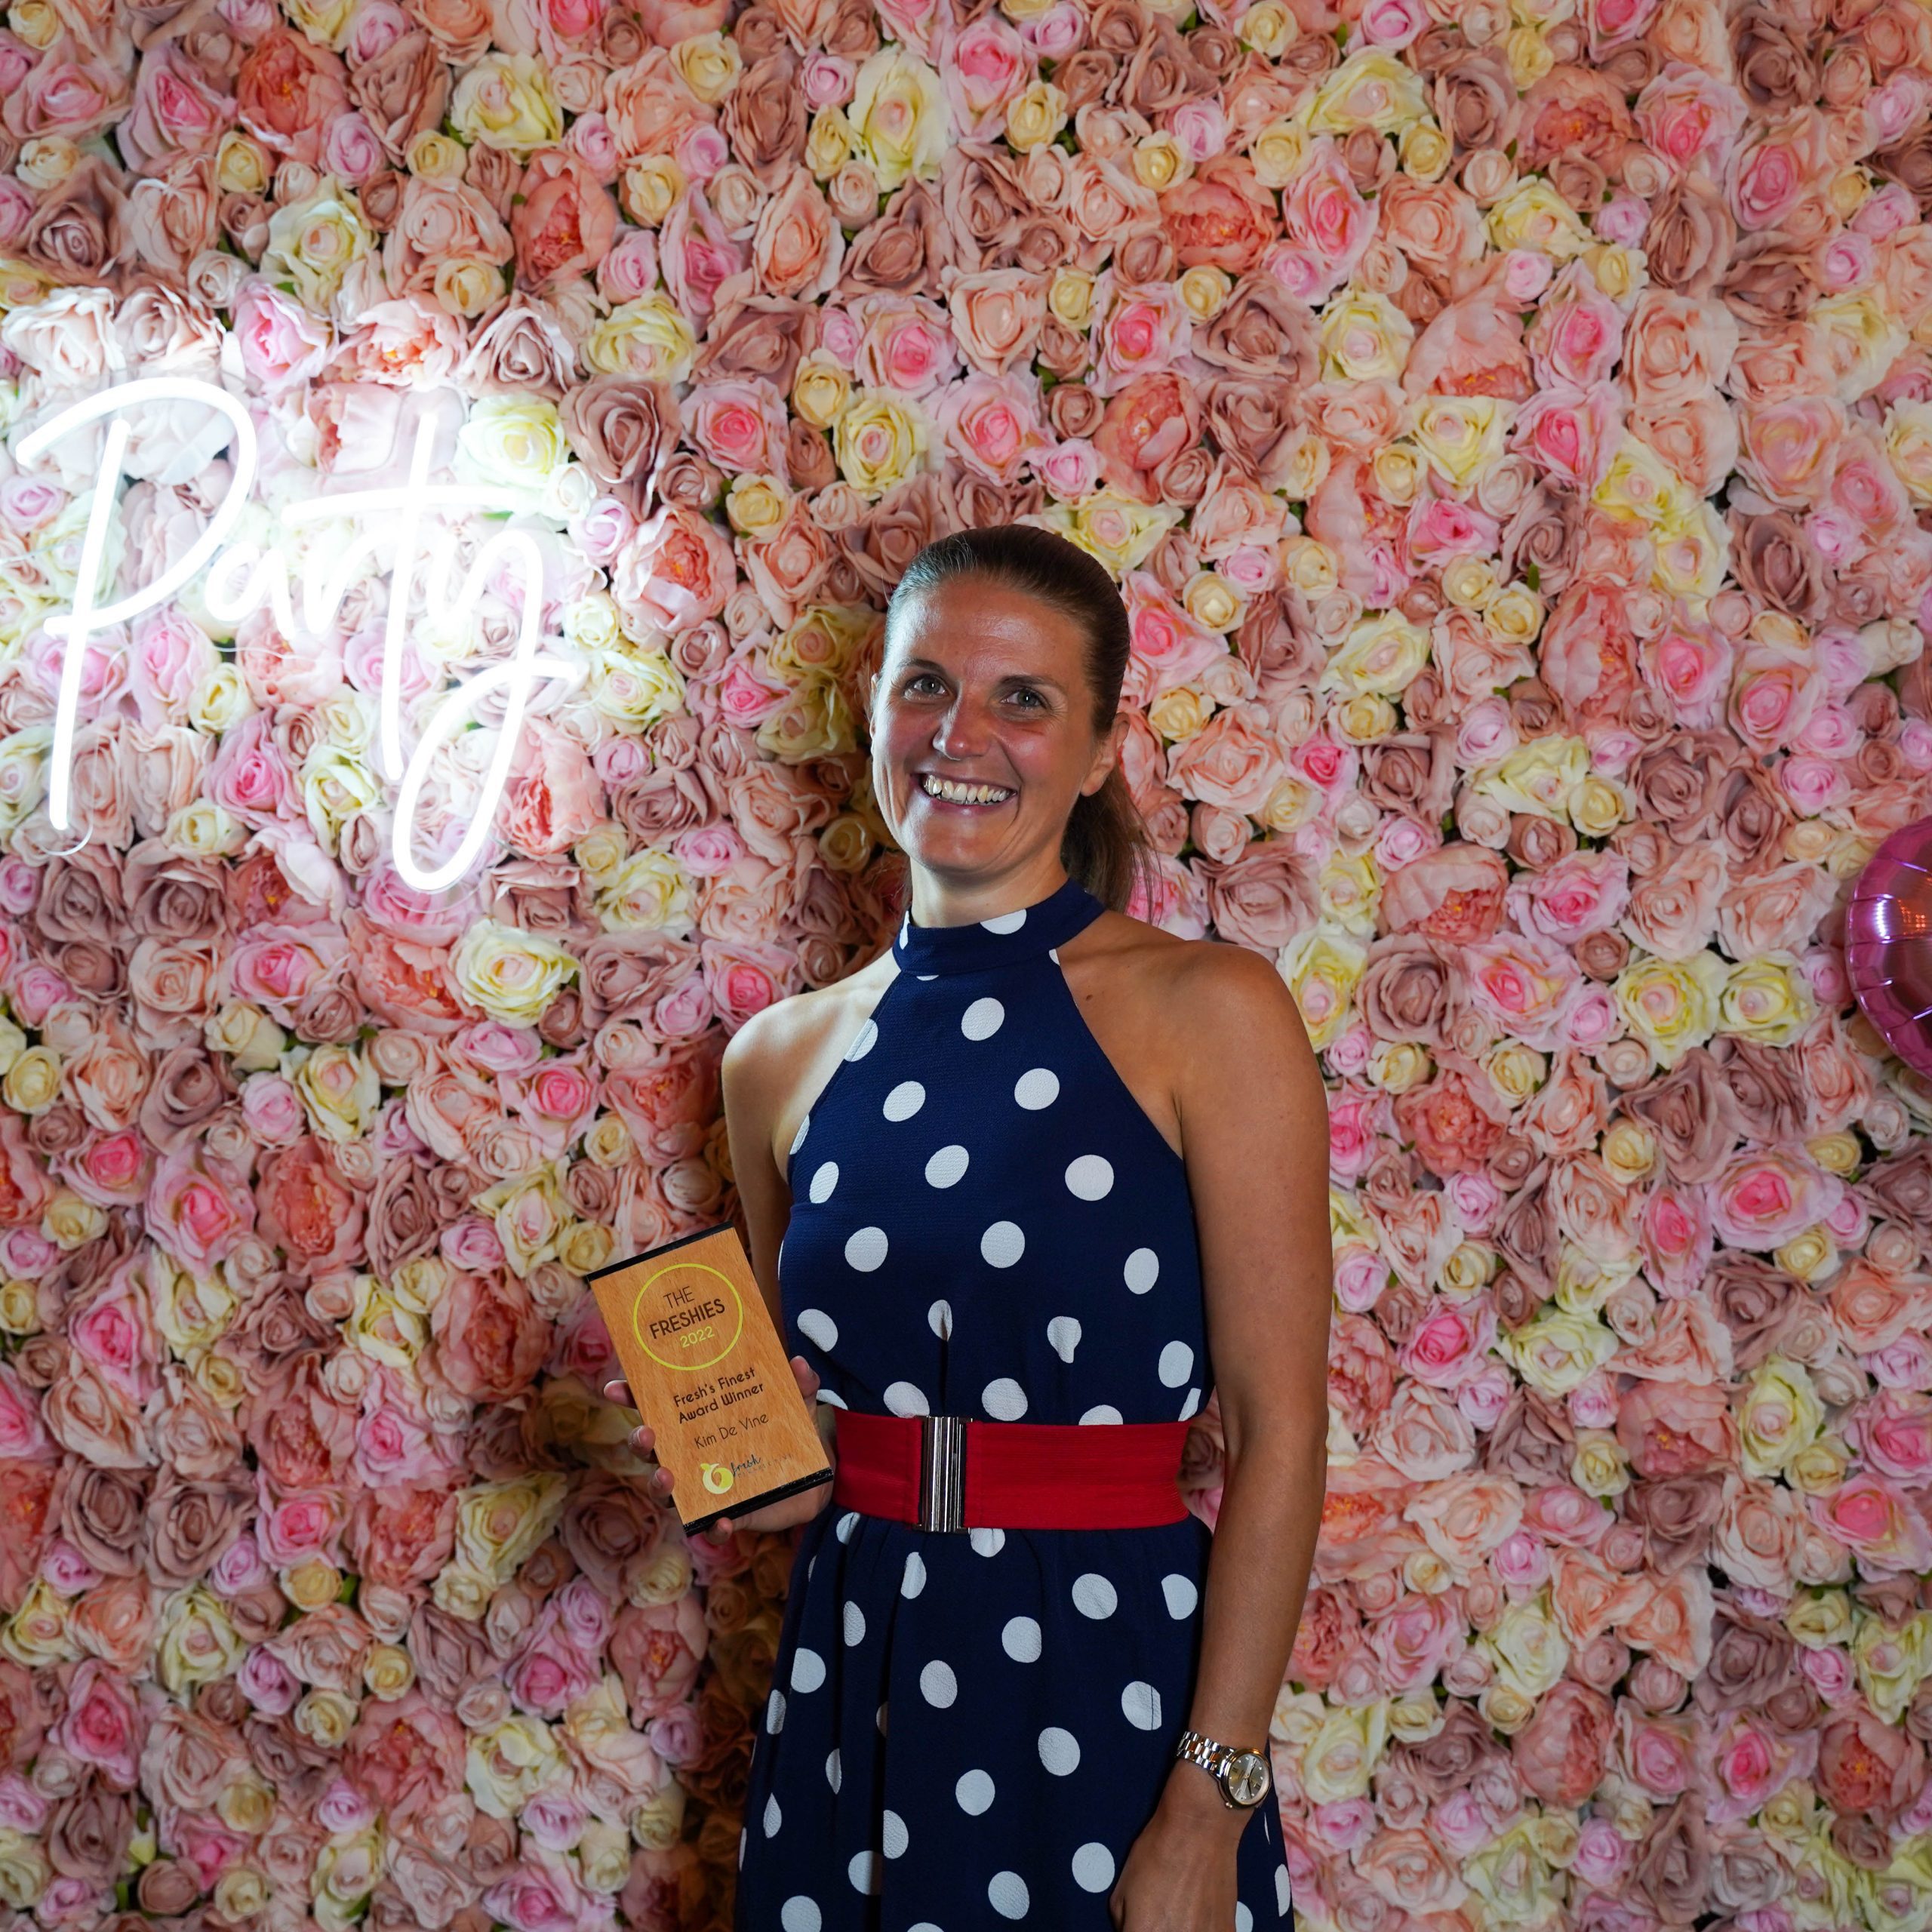 The Freshies 2022 award winner for Fresh's Finest, Kim De Vine. Kim is stood in front of a pink floral wall with a neon sign, she is stood holding her award